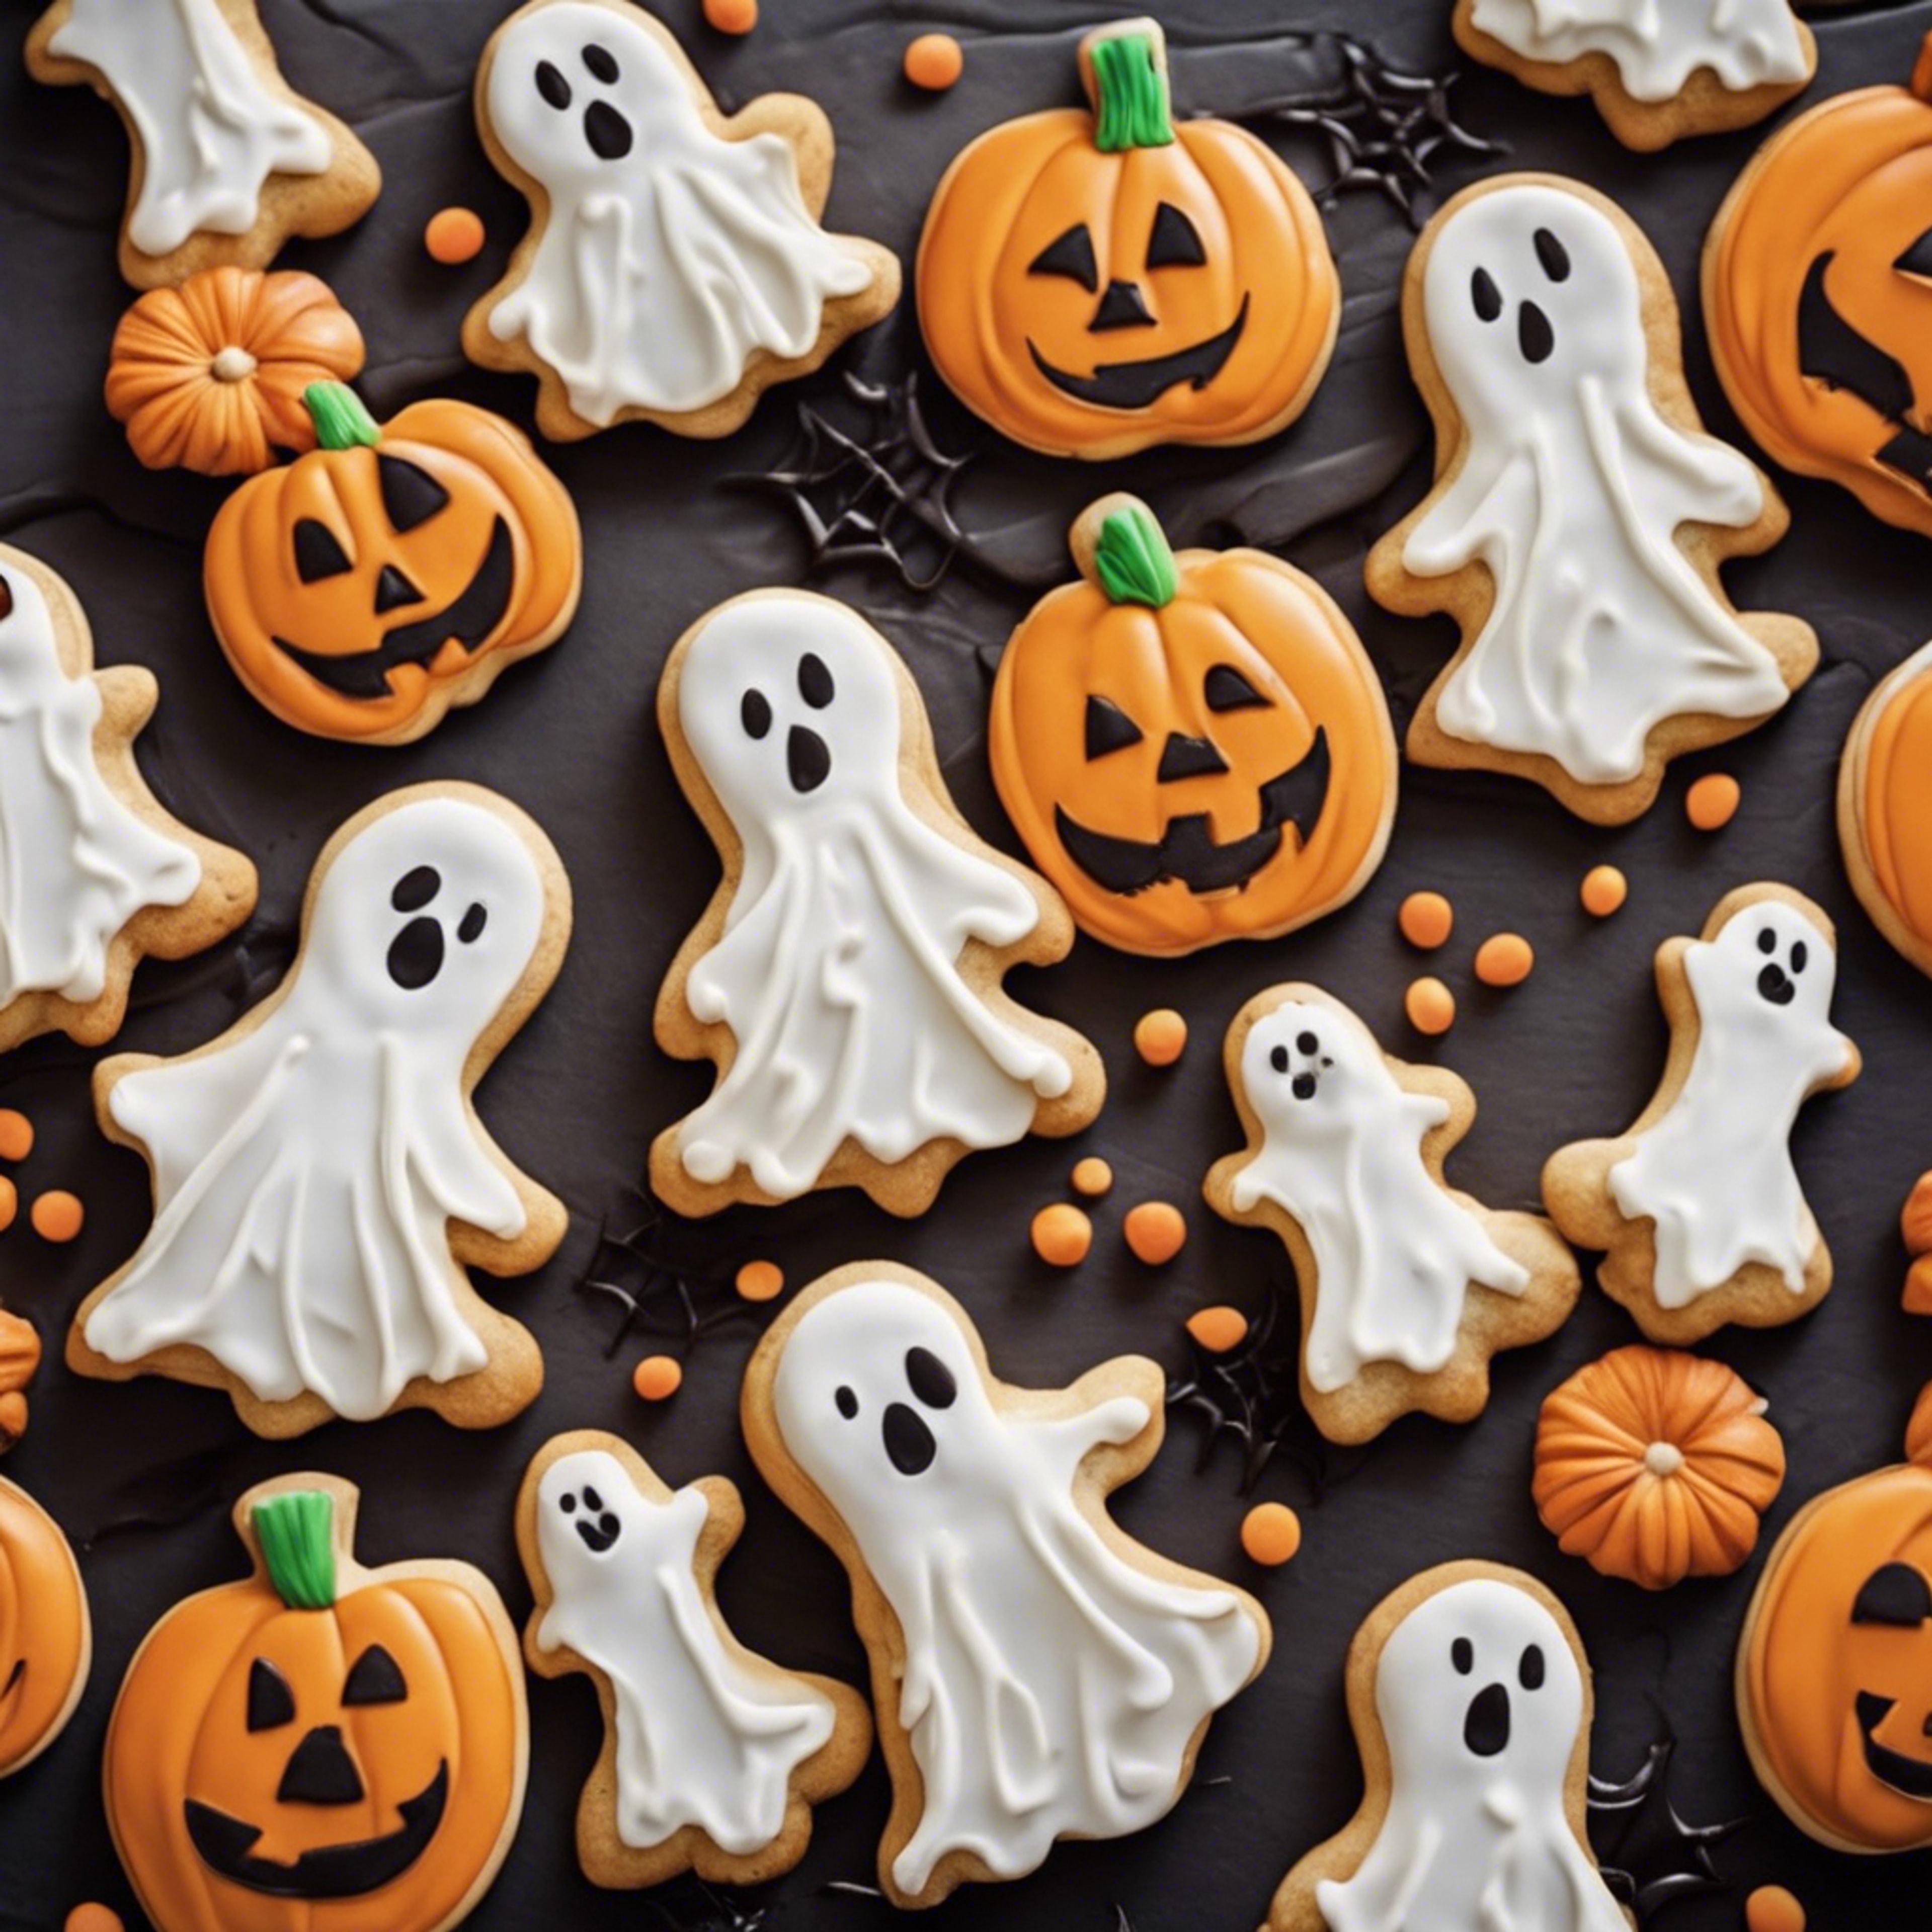 A bakery with a Halloween theme, featuring cookies shaped like ghosts and pumpkins. کاغذ دیواری[da61718461044d51ad06]